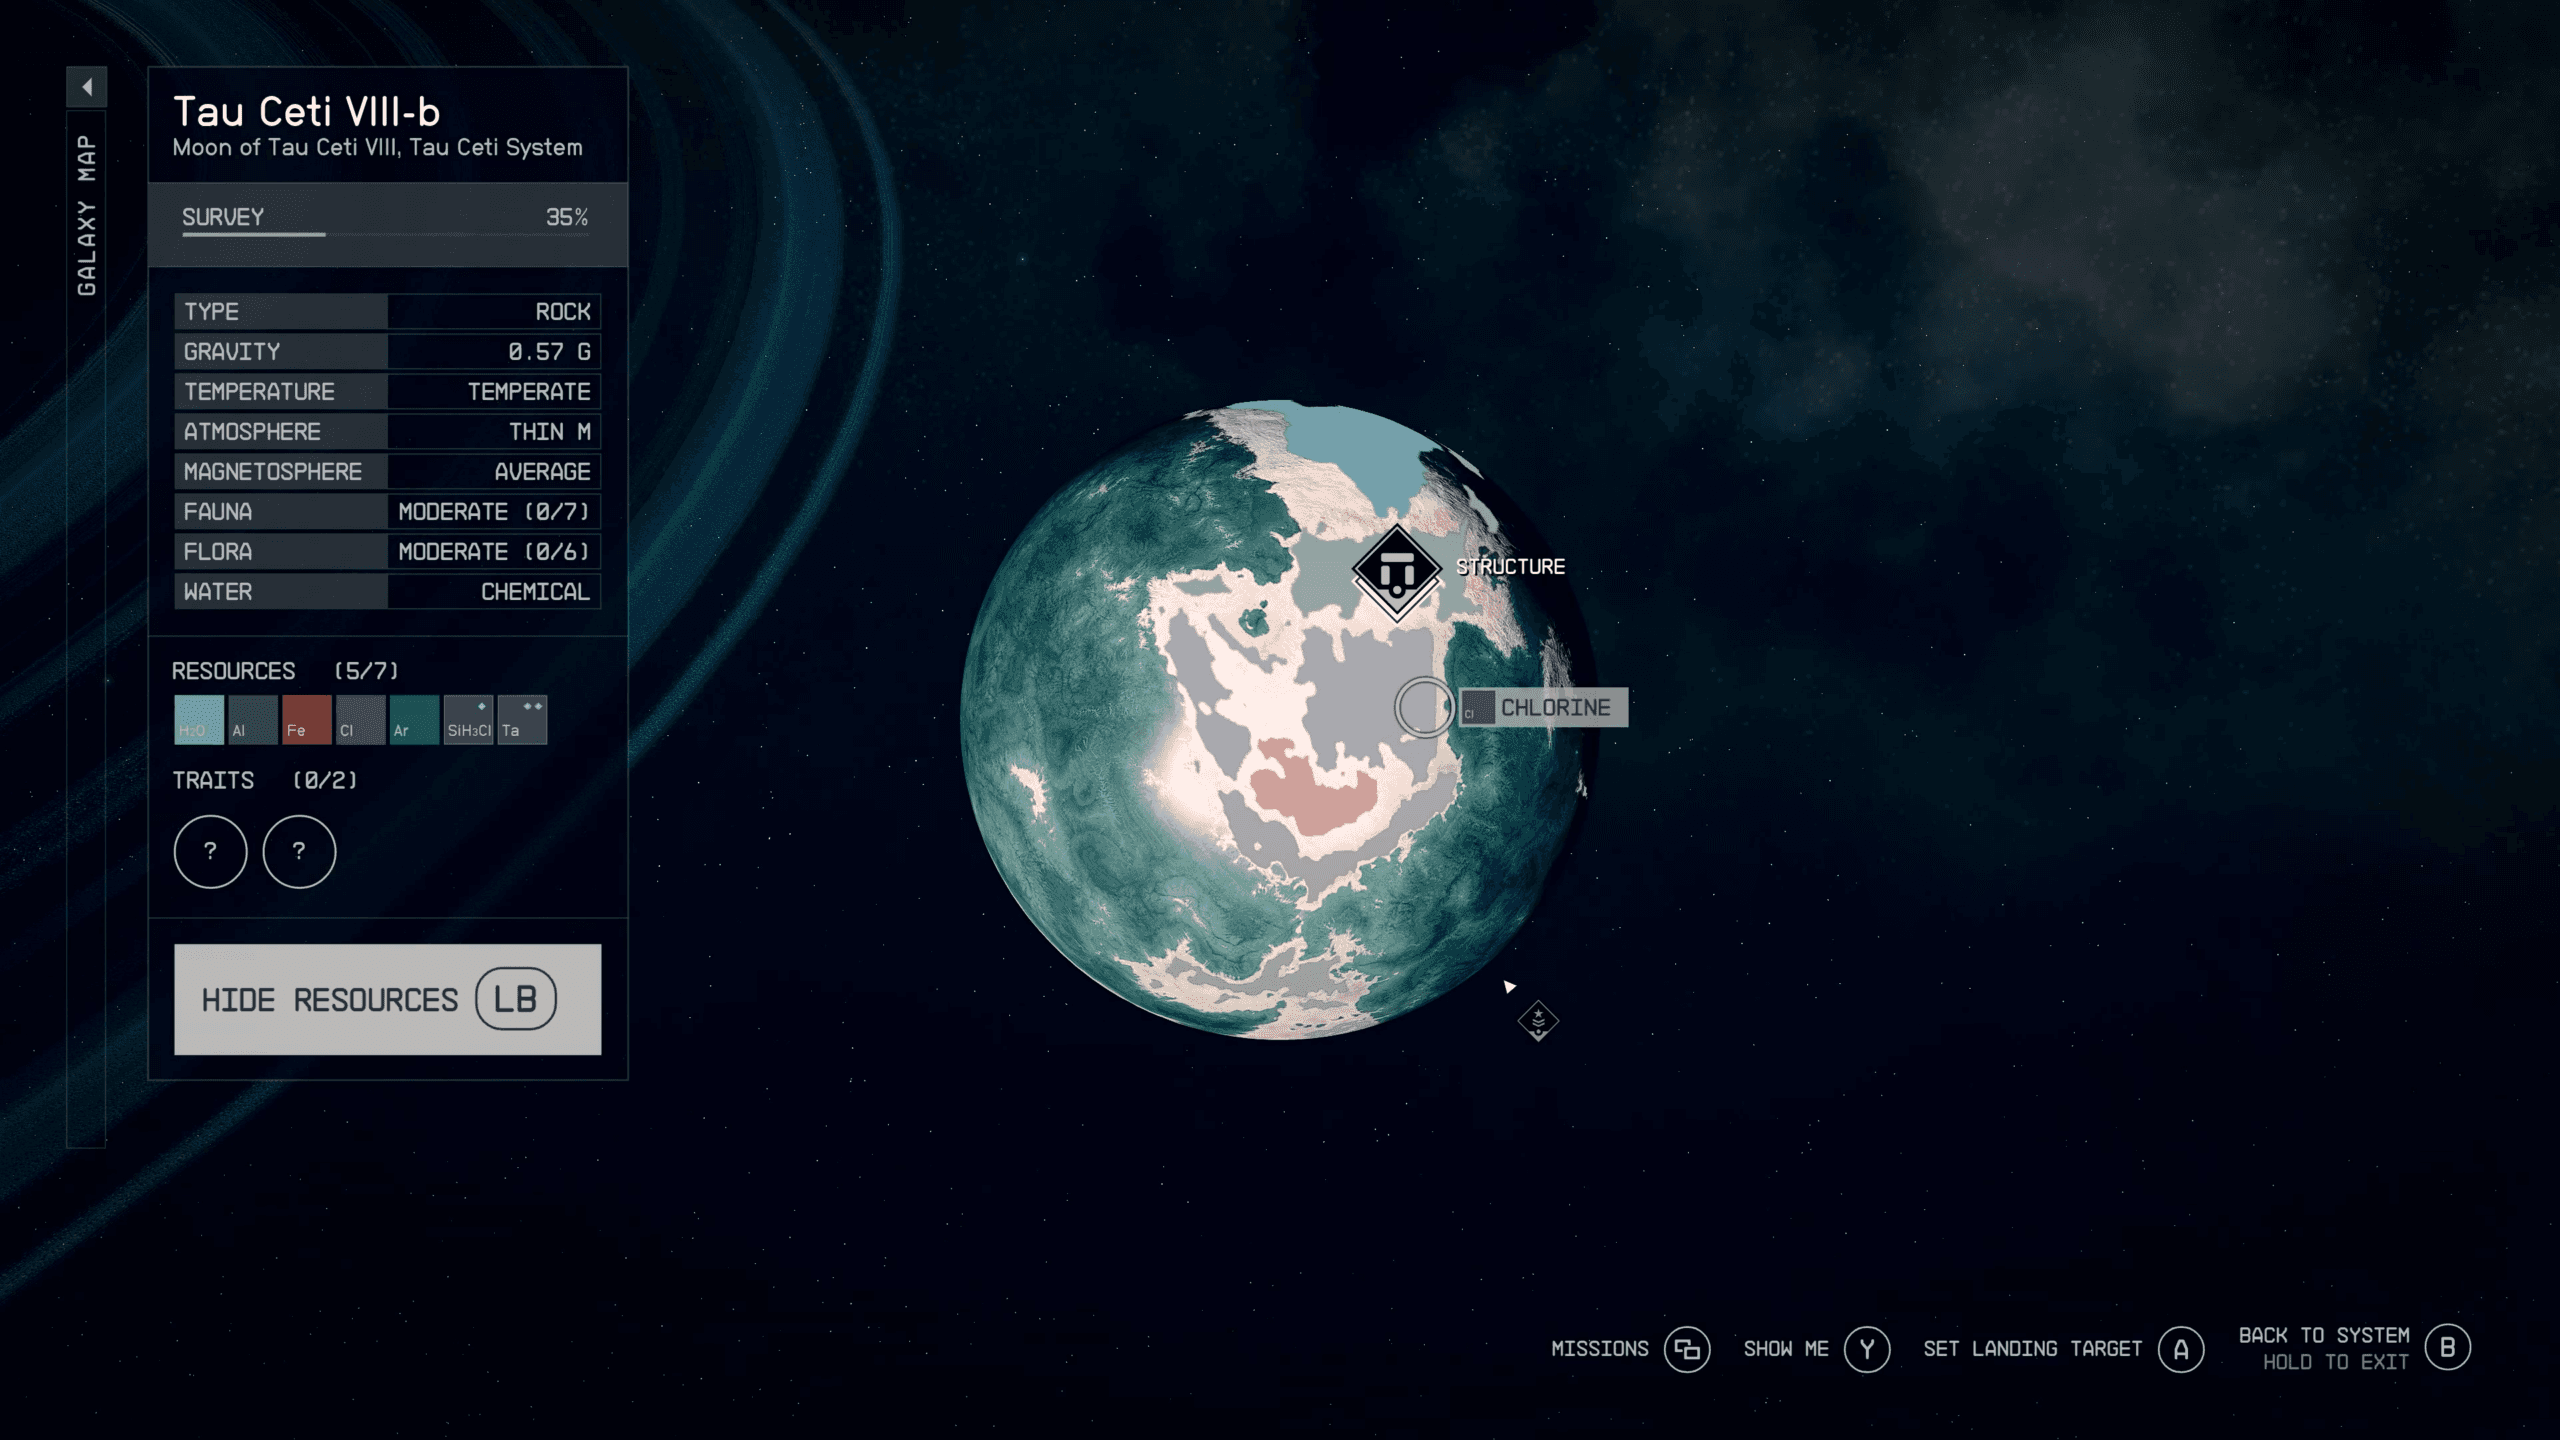 Planet Resource View